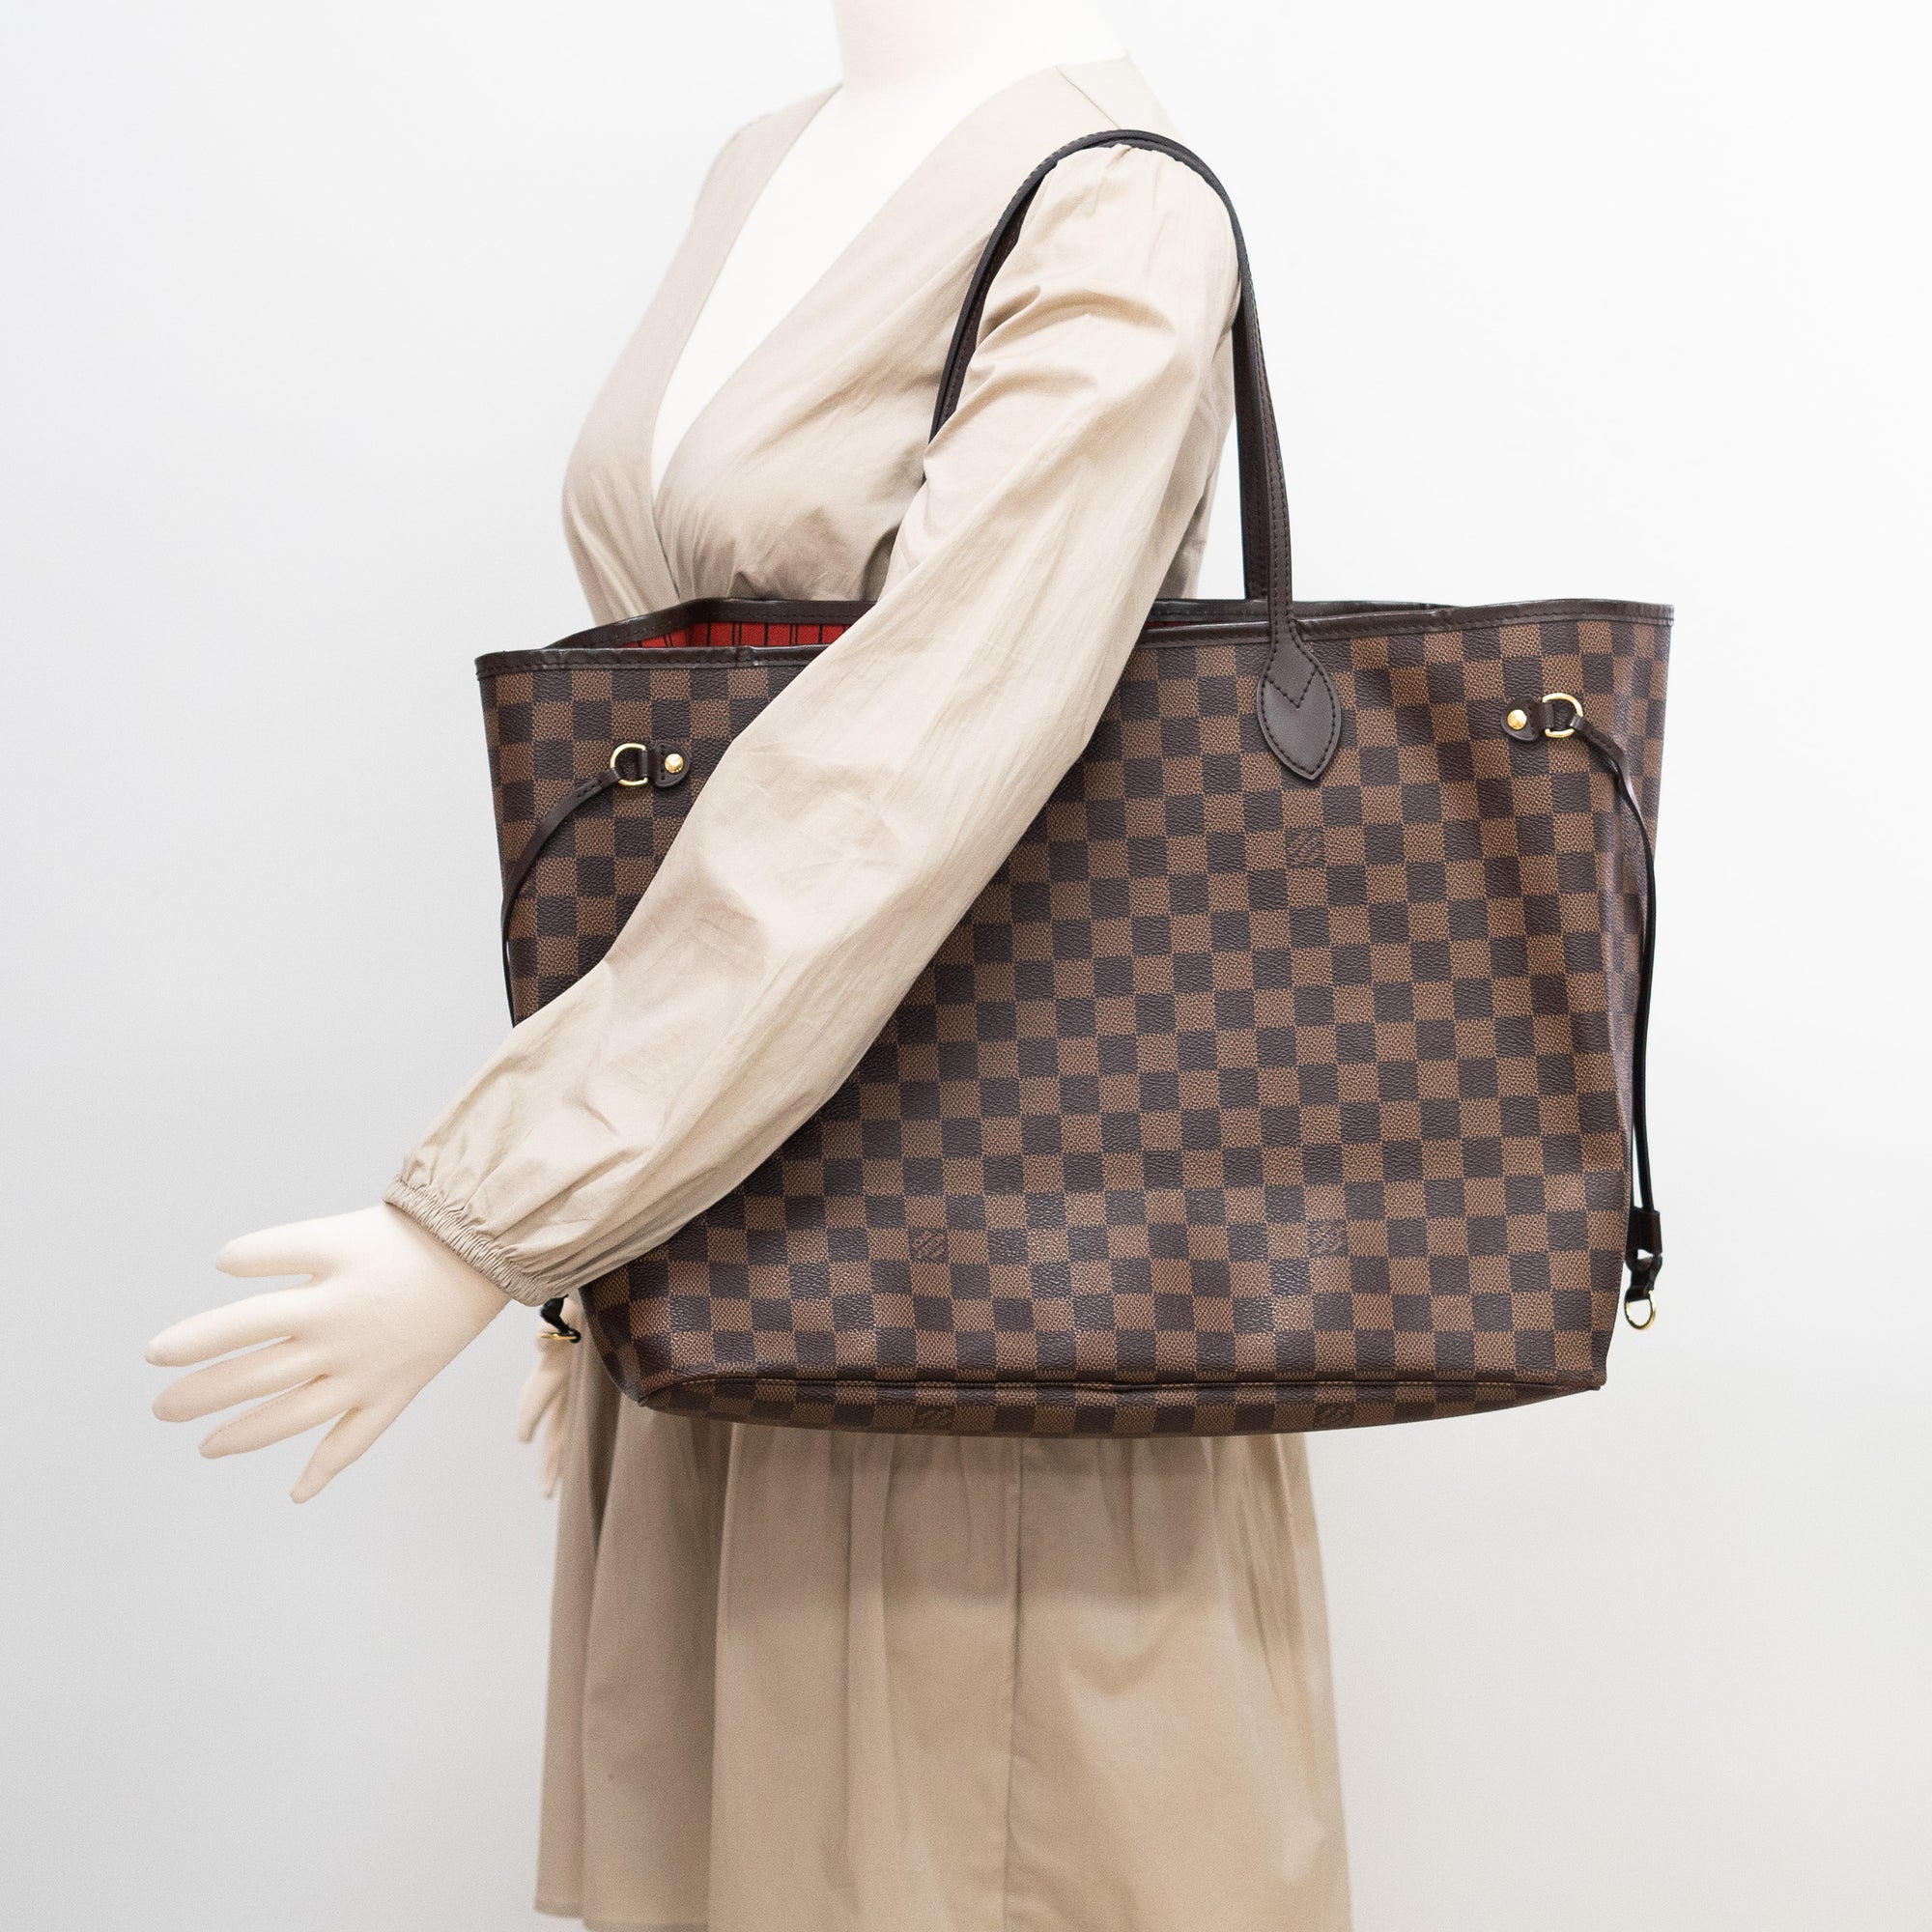 Louis Vuitton Neverfull GM Damier Ebene. ❤️ this bag One day